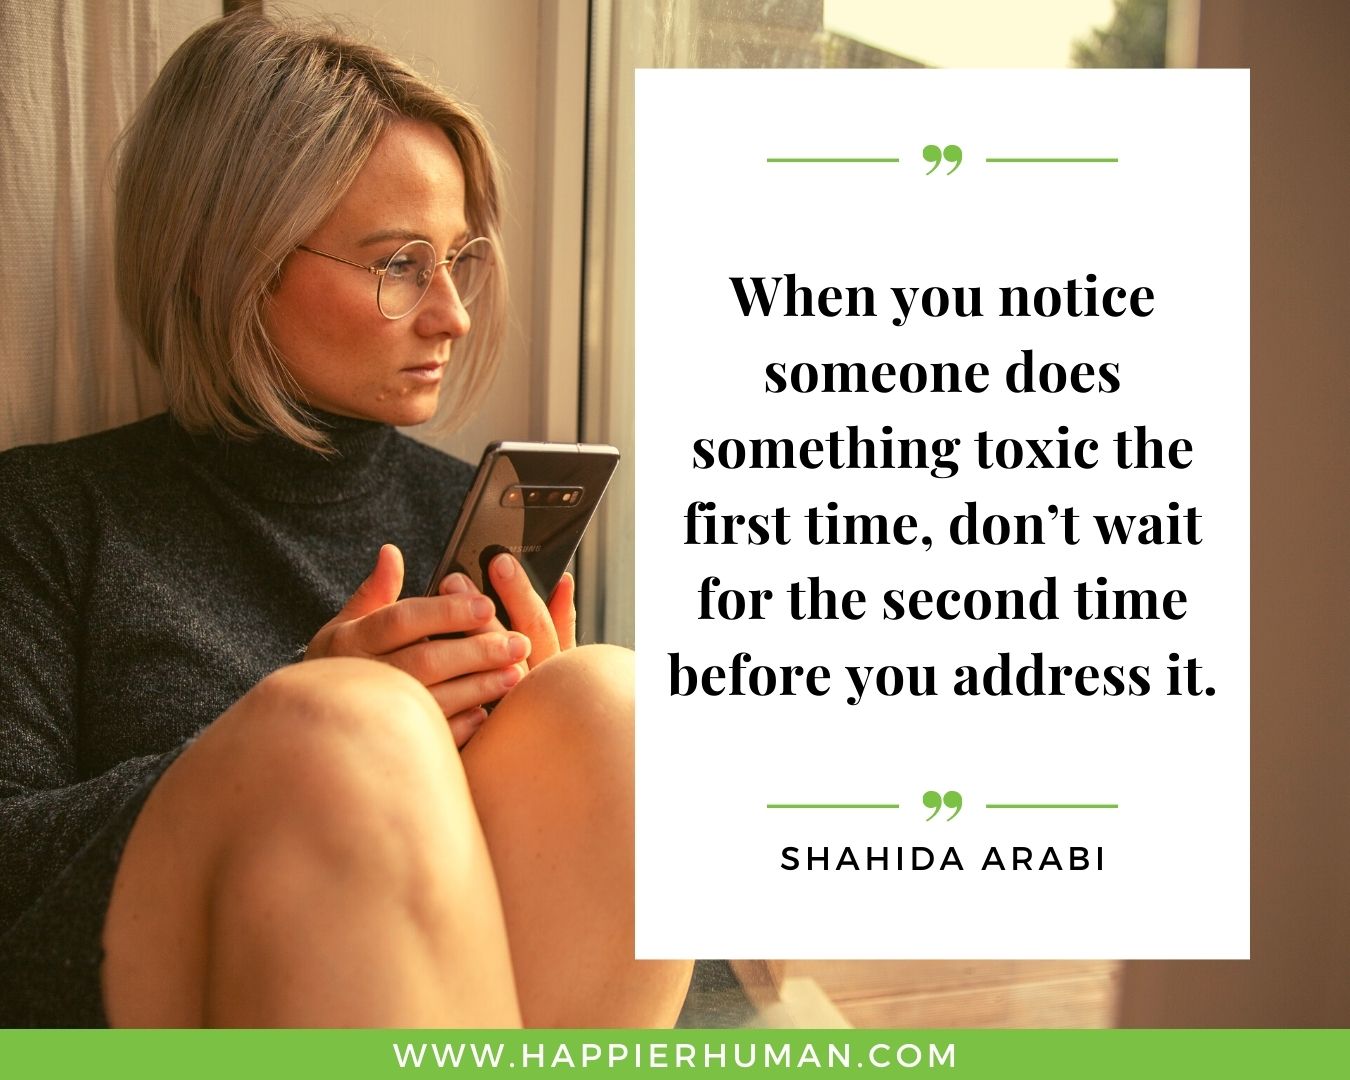 Toxic People Quotes - “When you notice someone does something toxic the first time, don’t wait for the second time before you address it.” – Shahida Arabi